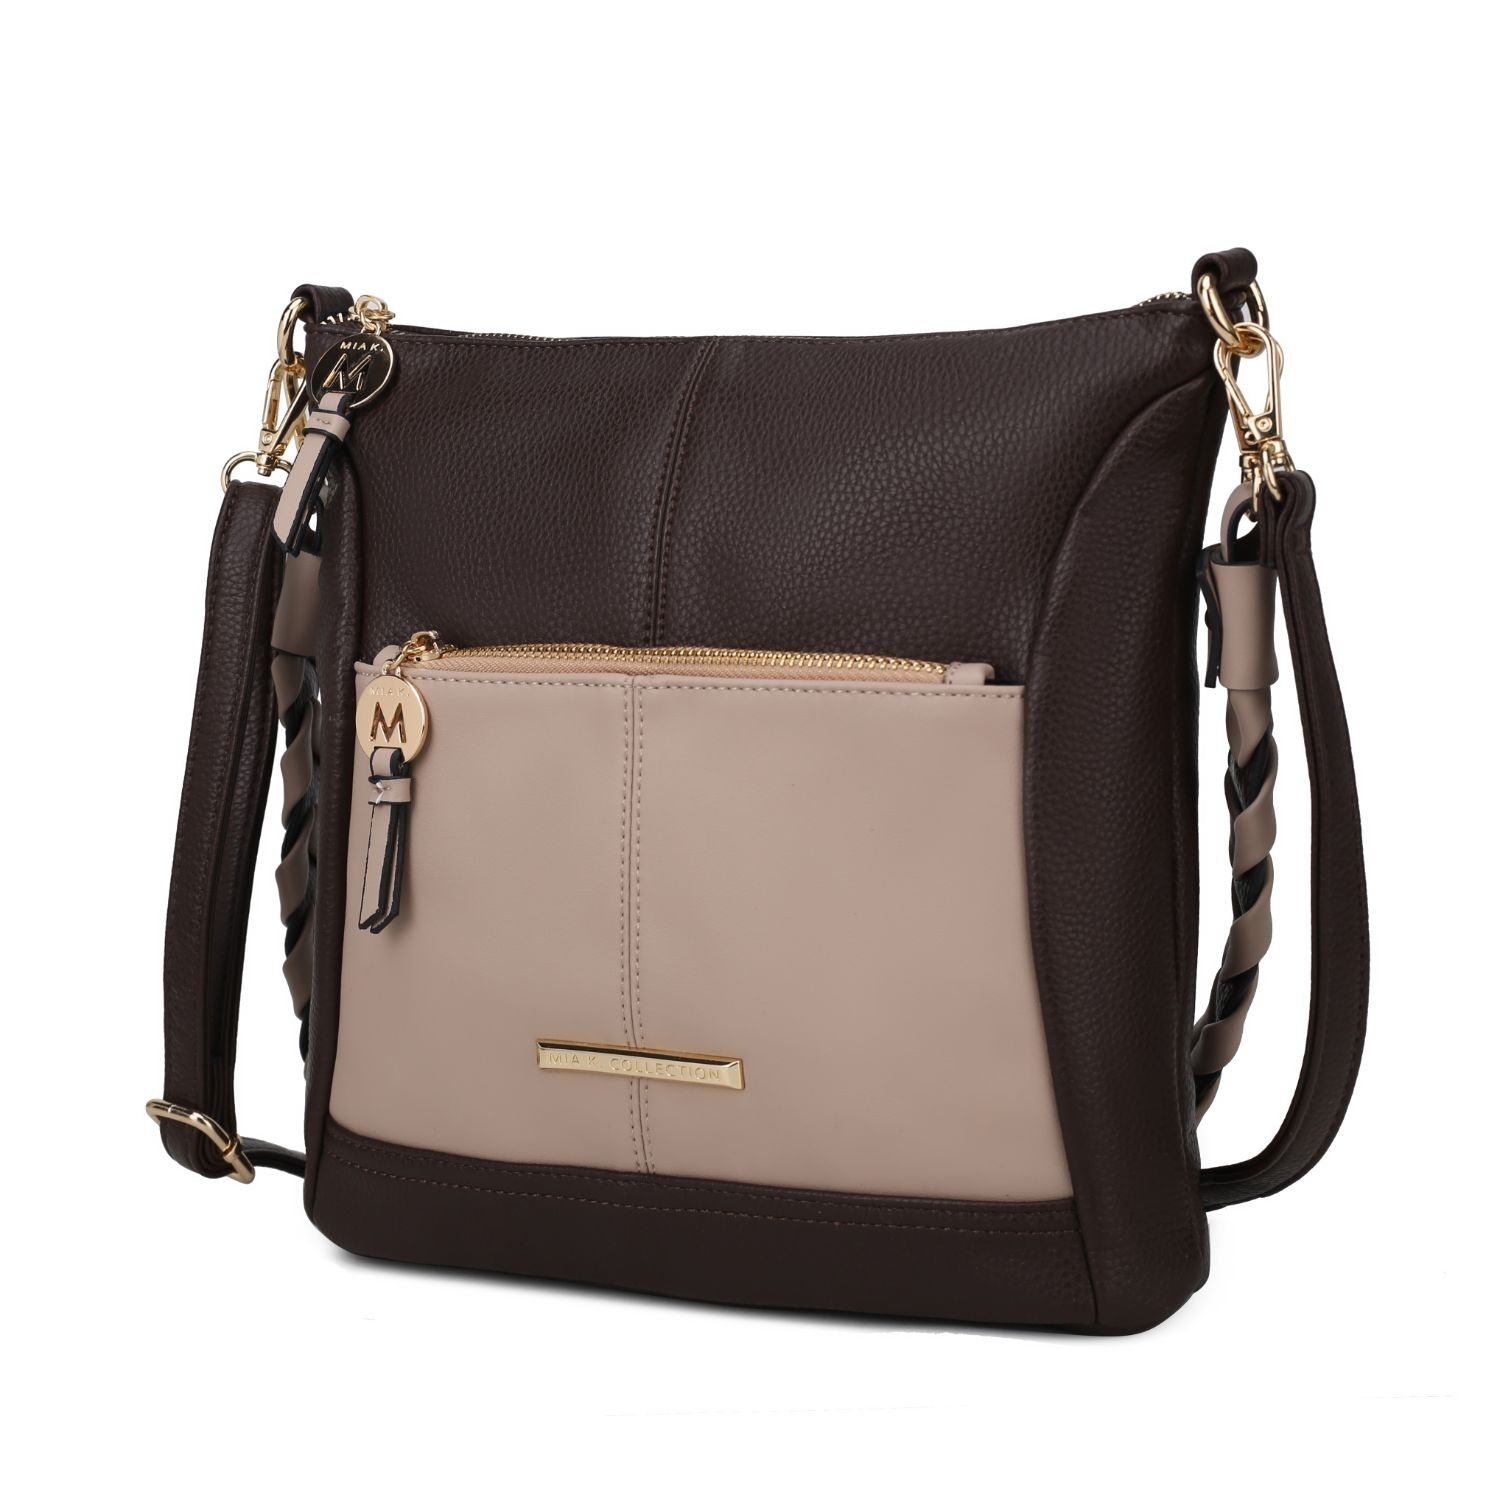 MKF Collection Nala Vegan Color-block Leather Women's Shoulder Bag By Mia K. - Coffee-taupe